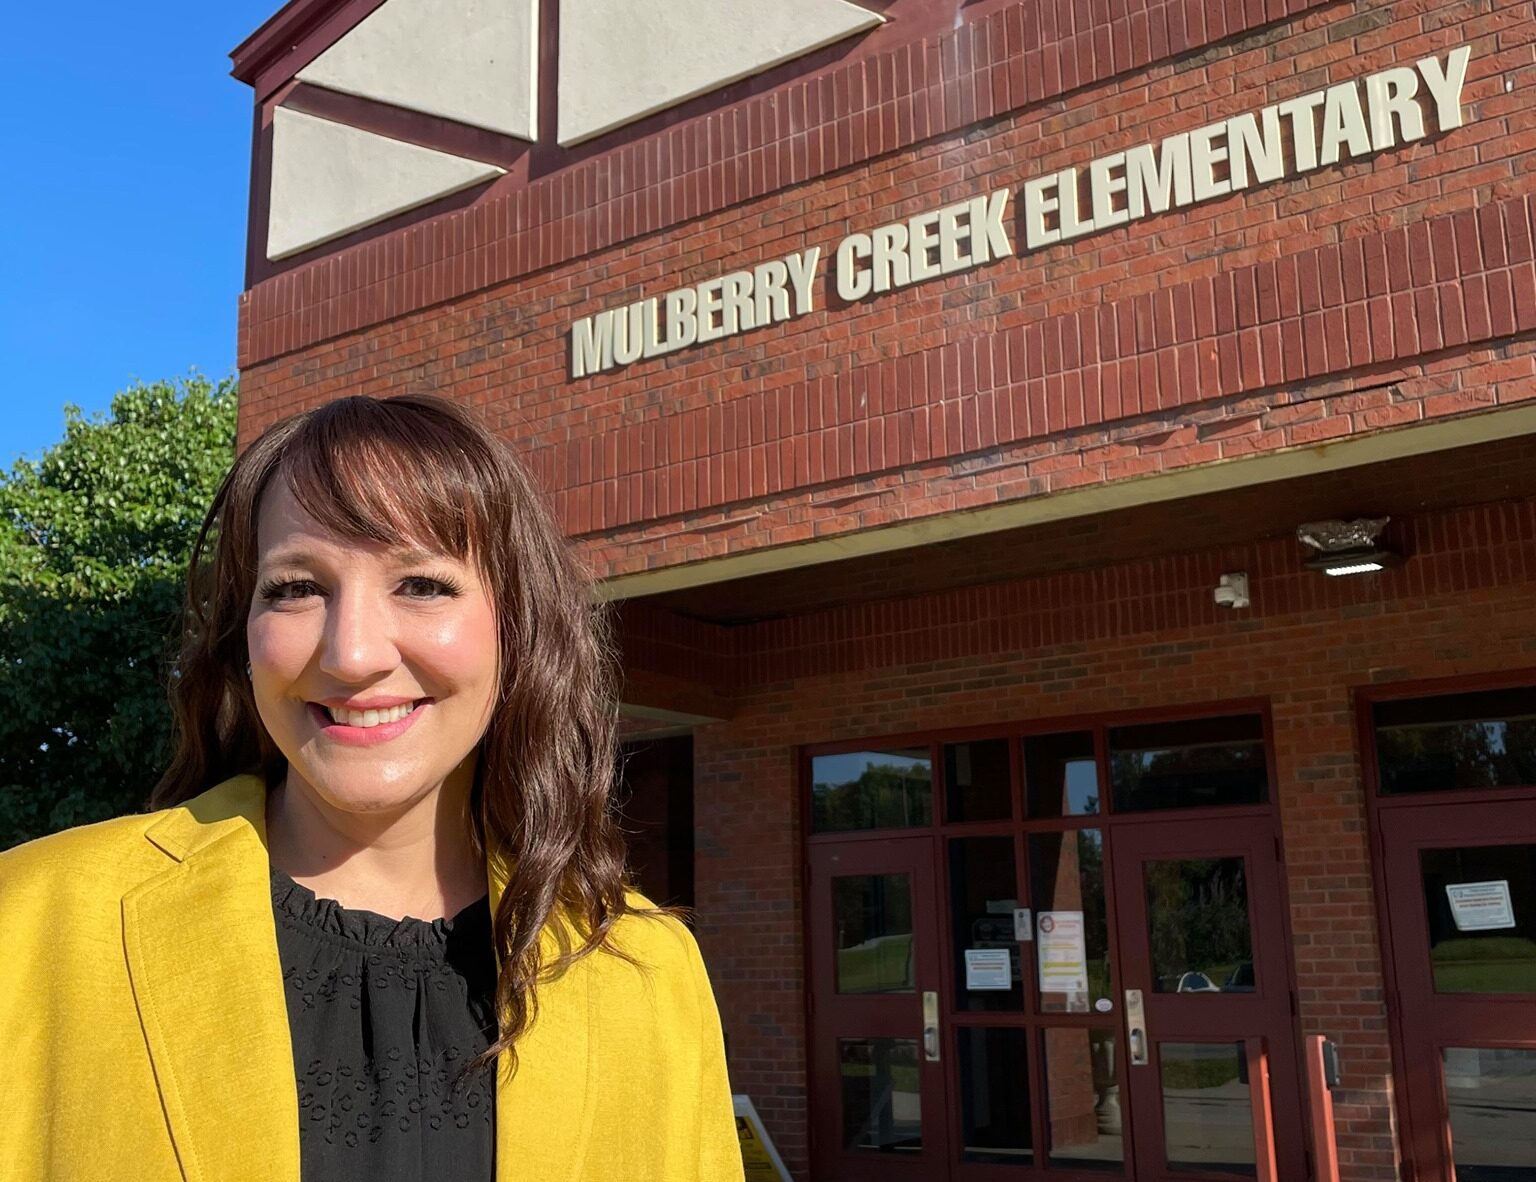 Meet the new principal at Mulberry Creek Elementary School